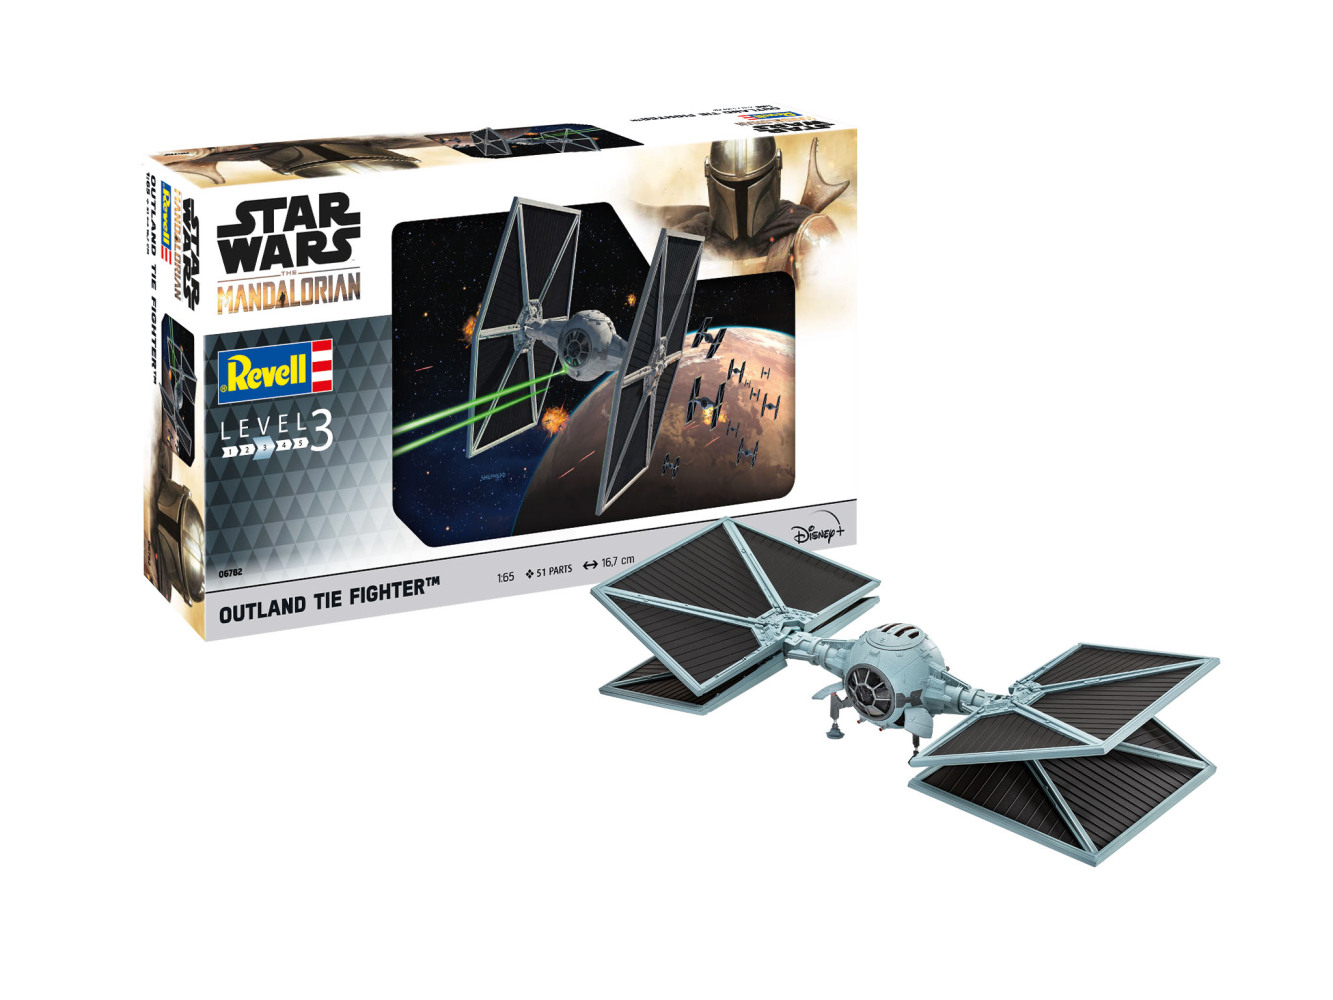 Star Wars The Mandalorian: Outland TIE Fighter 